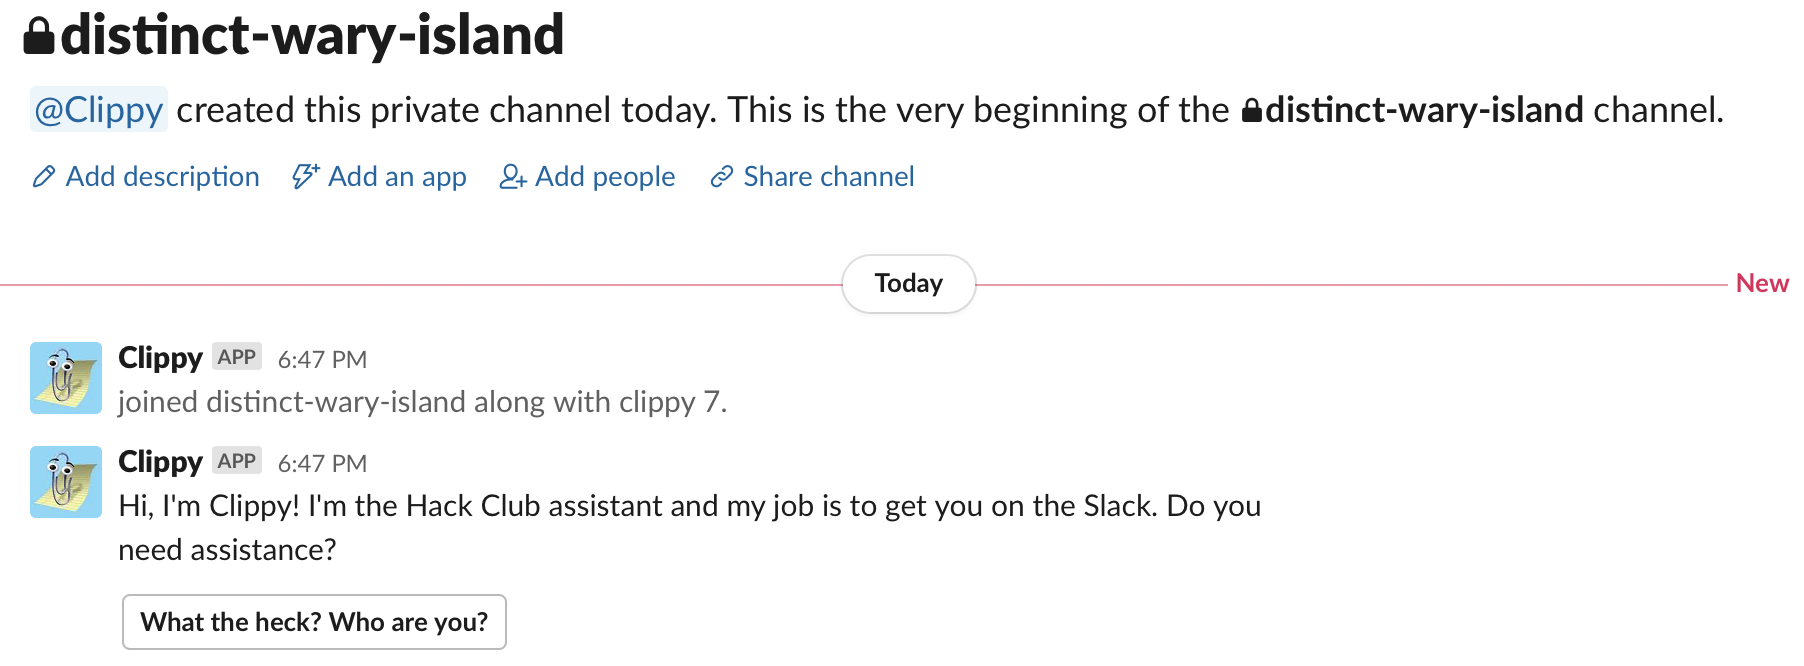 An image containing the first few messages Clippy sends when someone joins the Slack